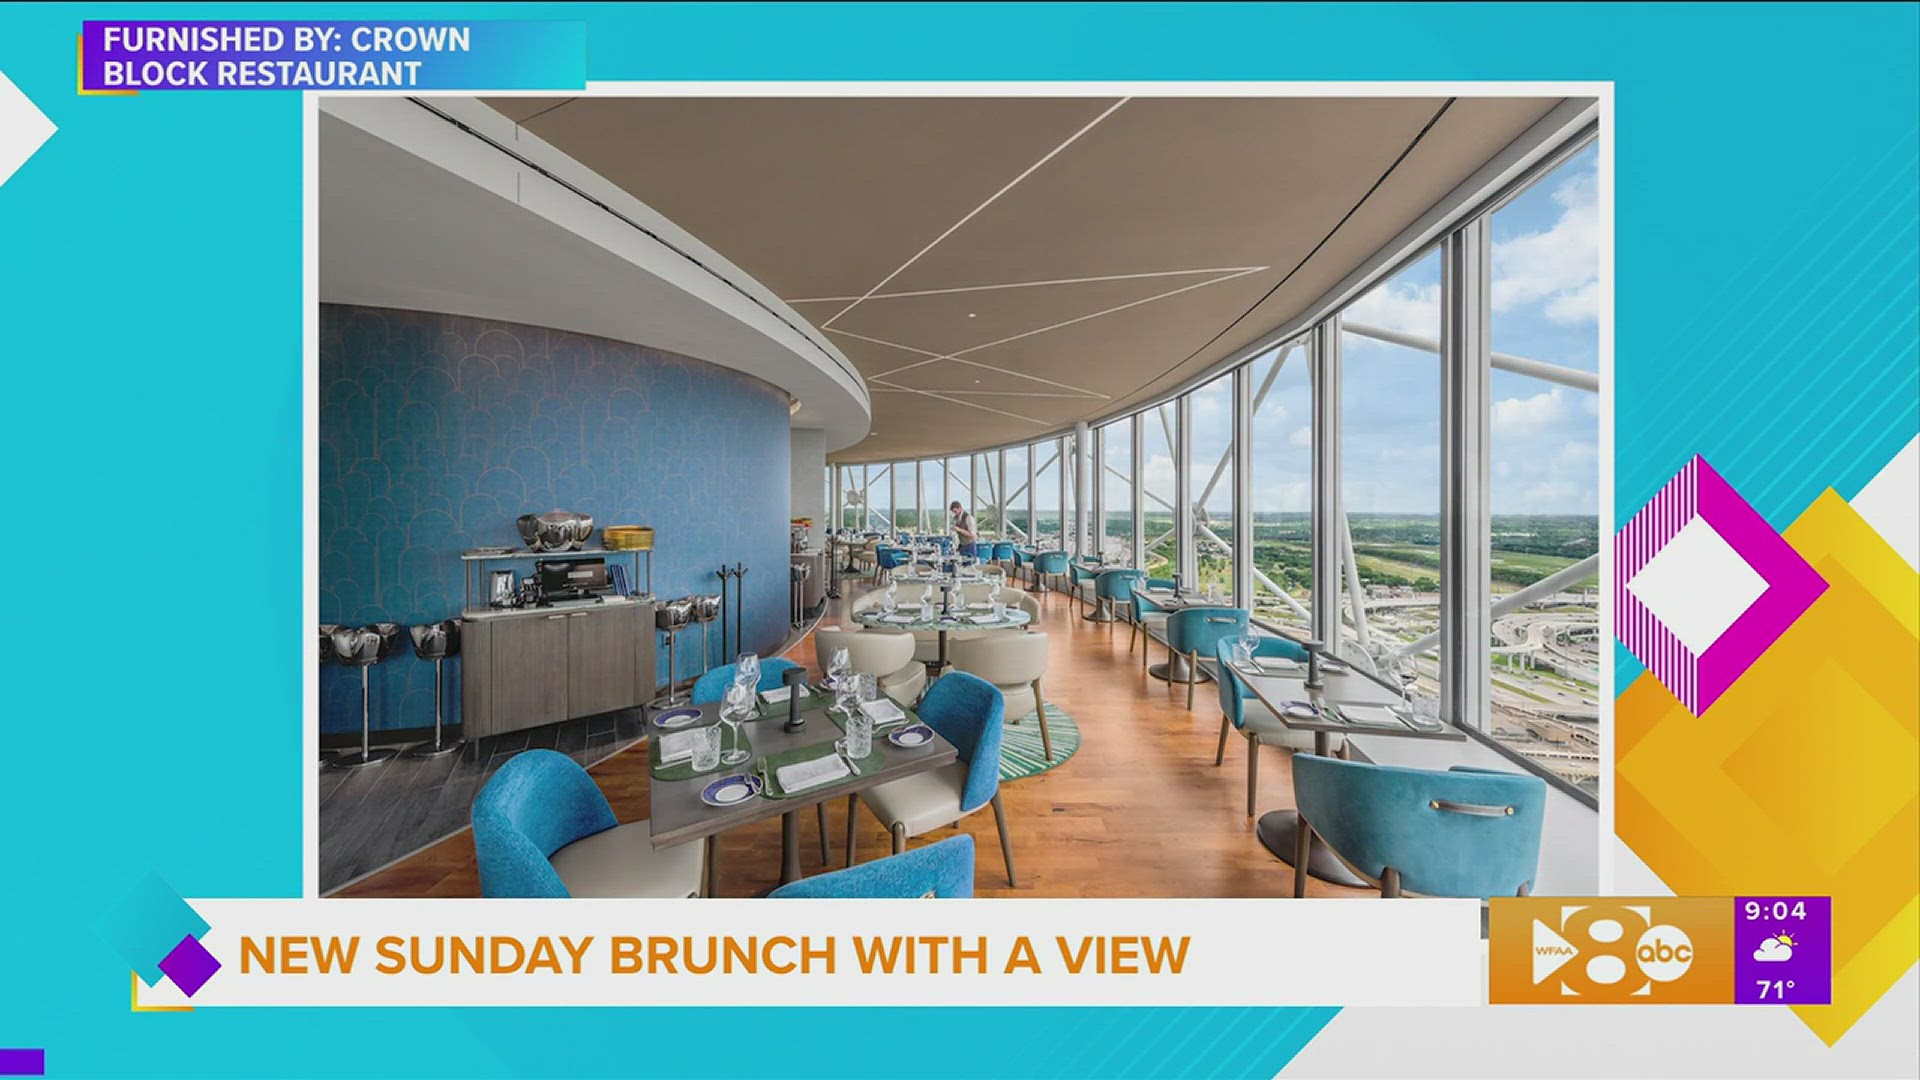 Crown Block at Reunion Tower is starting up a new all-inclusive brunch service Sunday, September 23